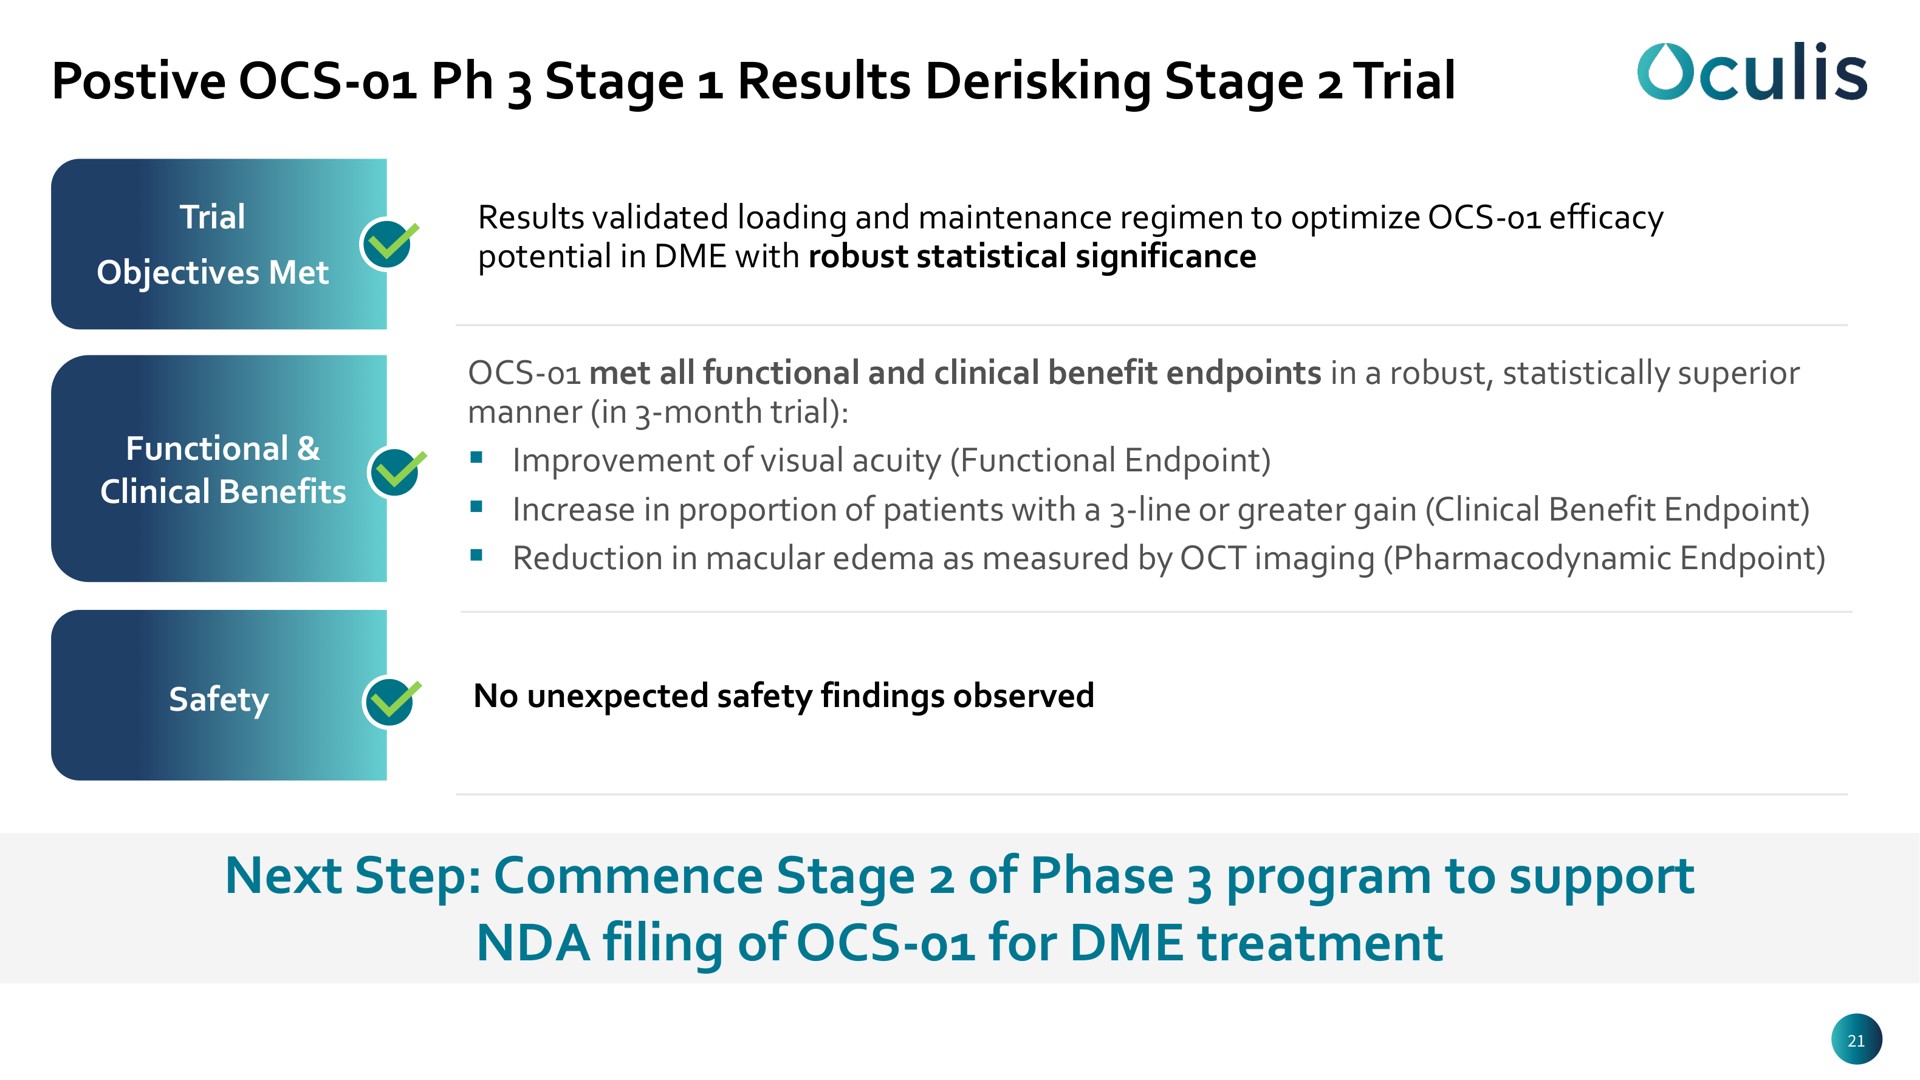 stage results stage trial next step commence stage of phase program to support filing of for treatment | Oculis